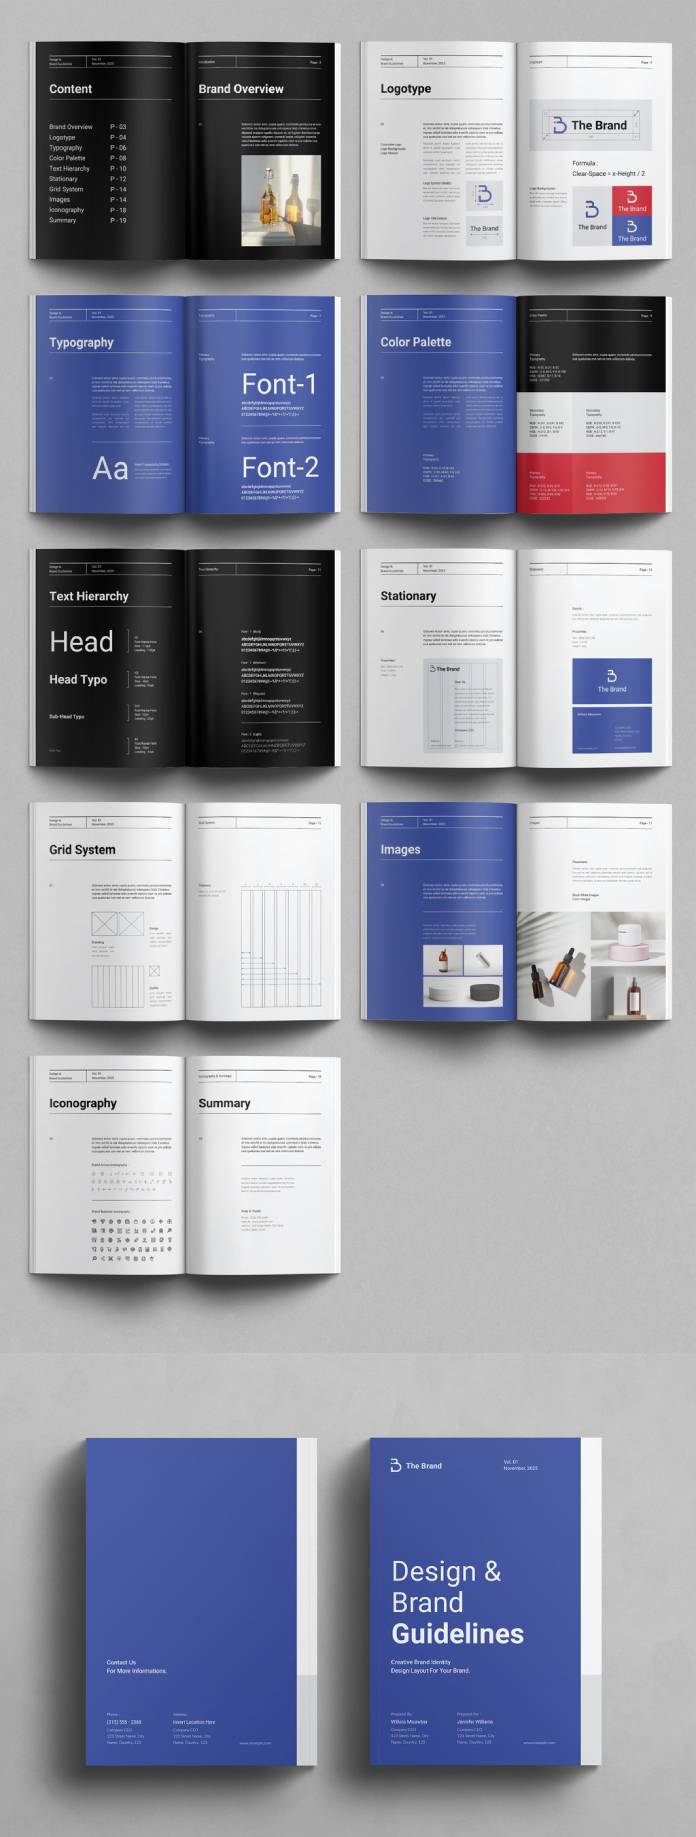 Design and Brand Guidelines Template by TemplatesForest